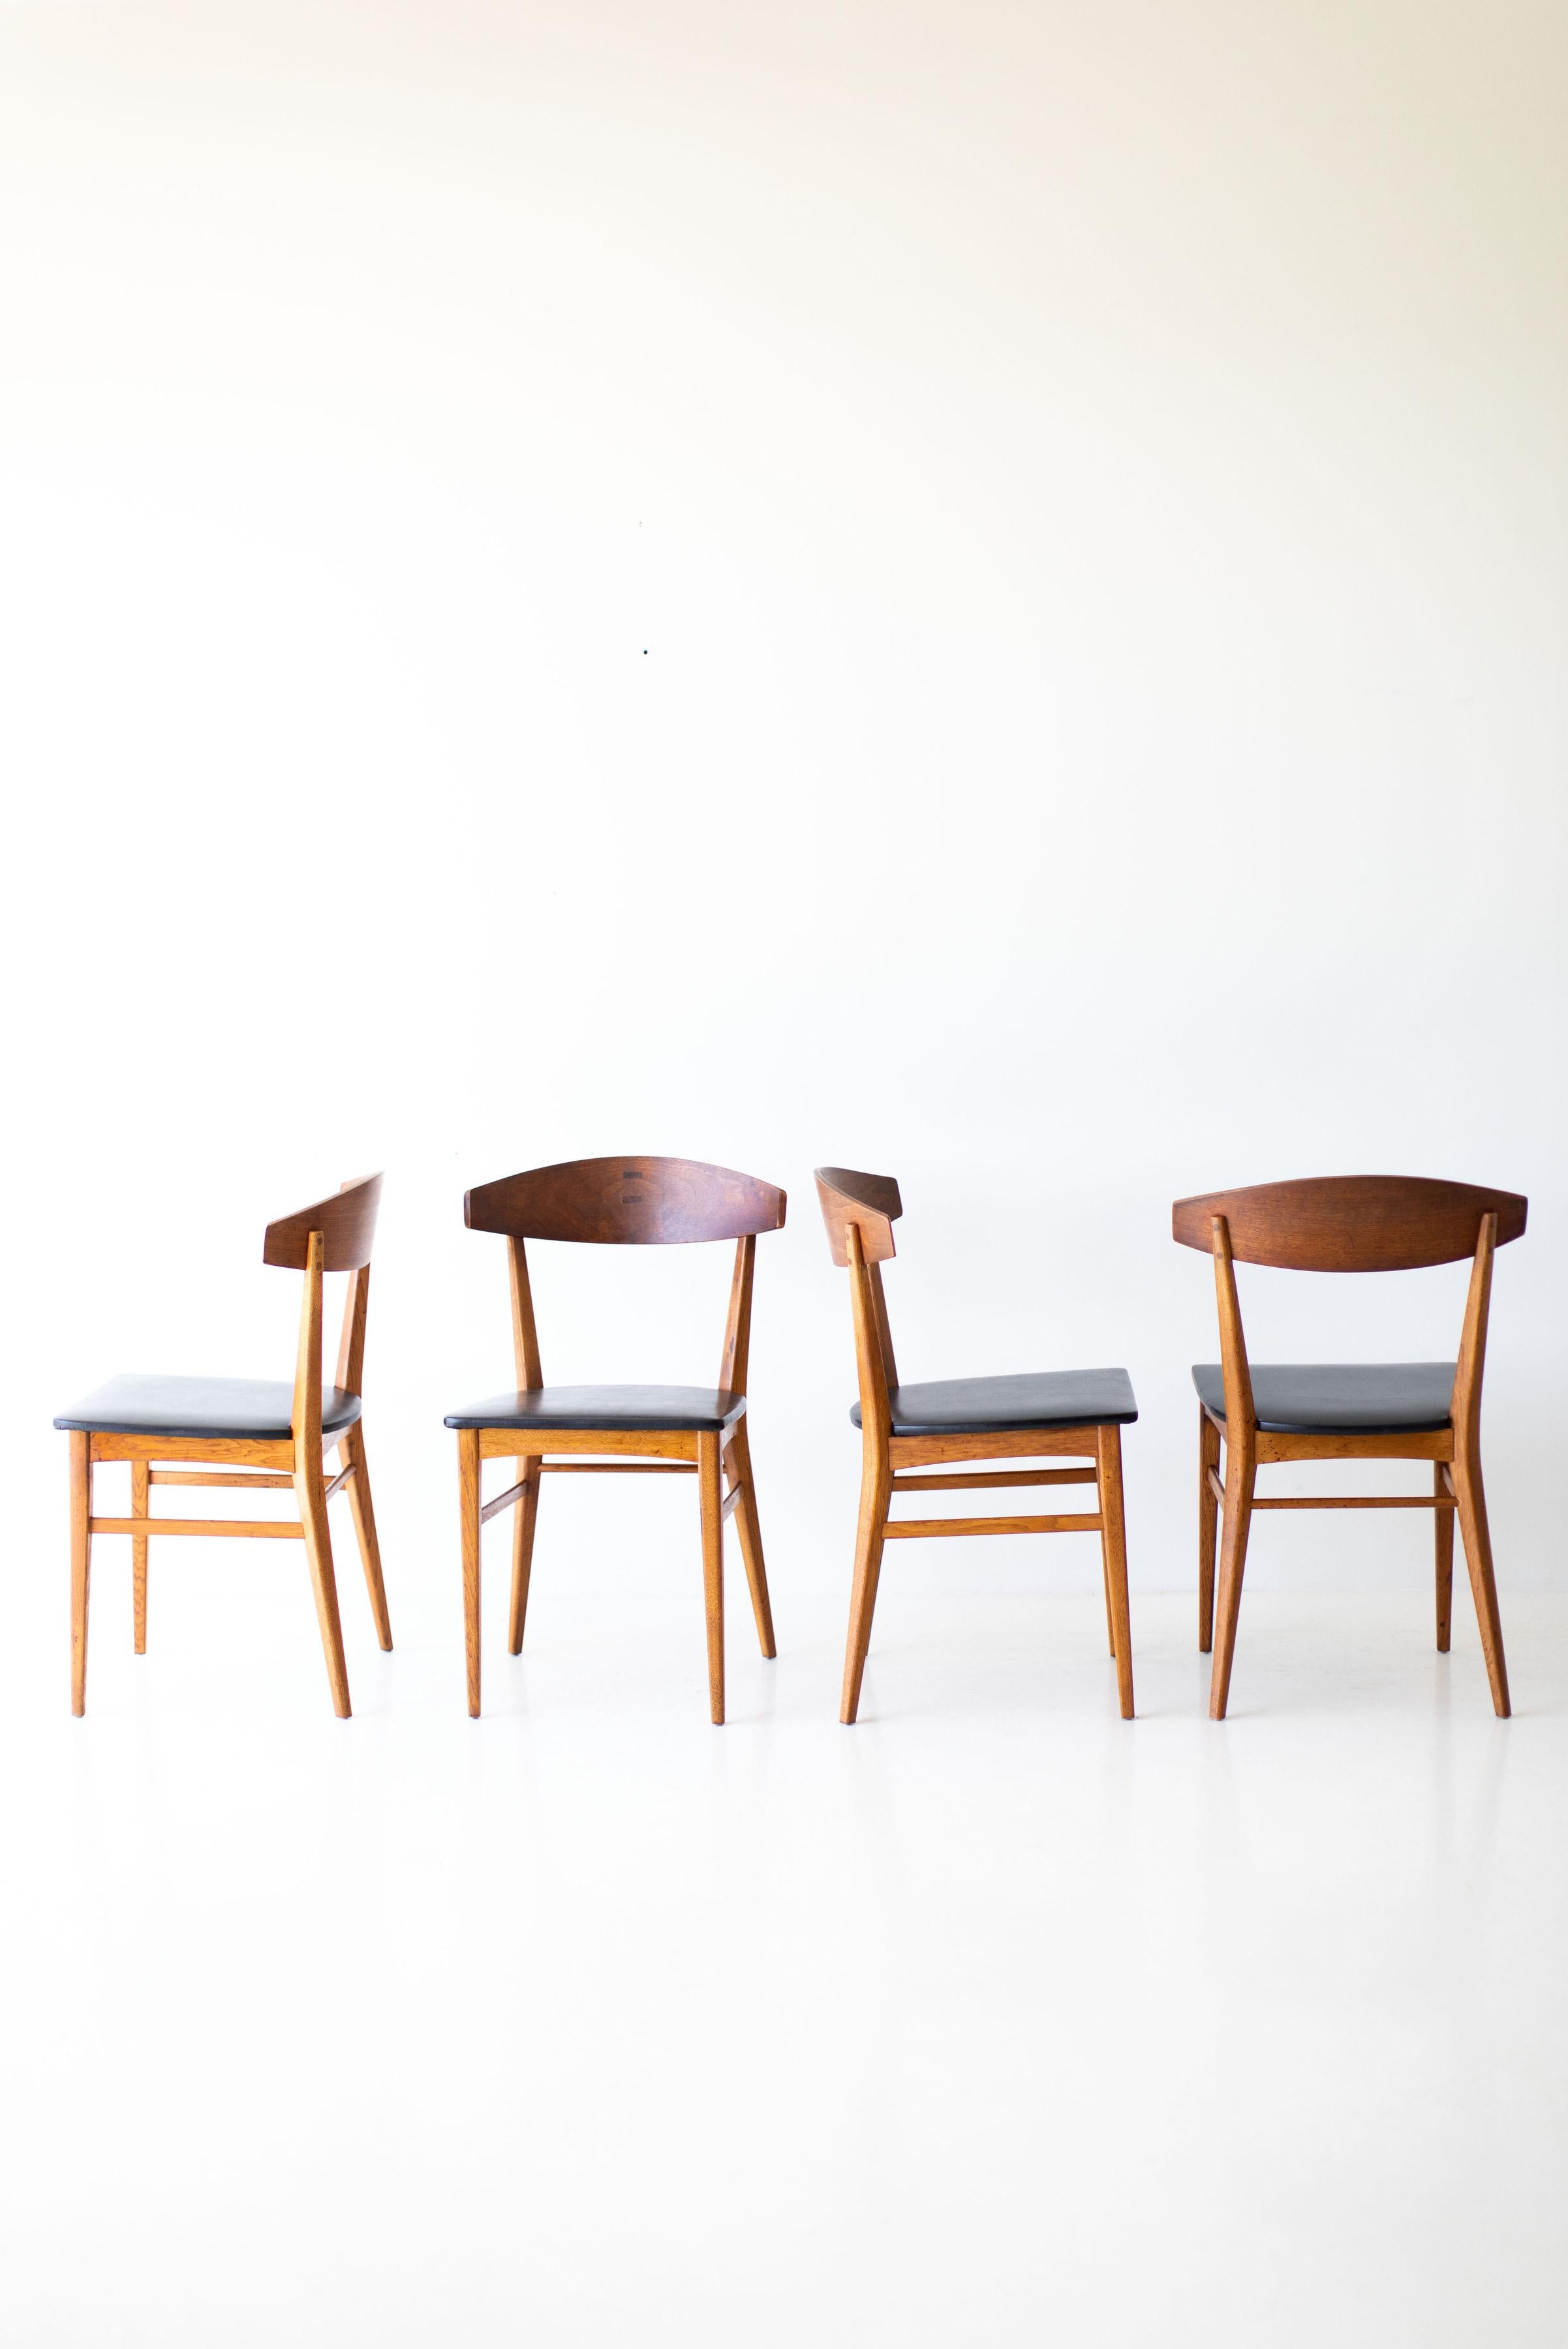 Wood Paul McCobb Dining Chairs for Lane Components Line